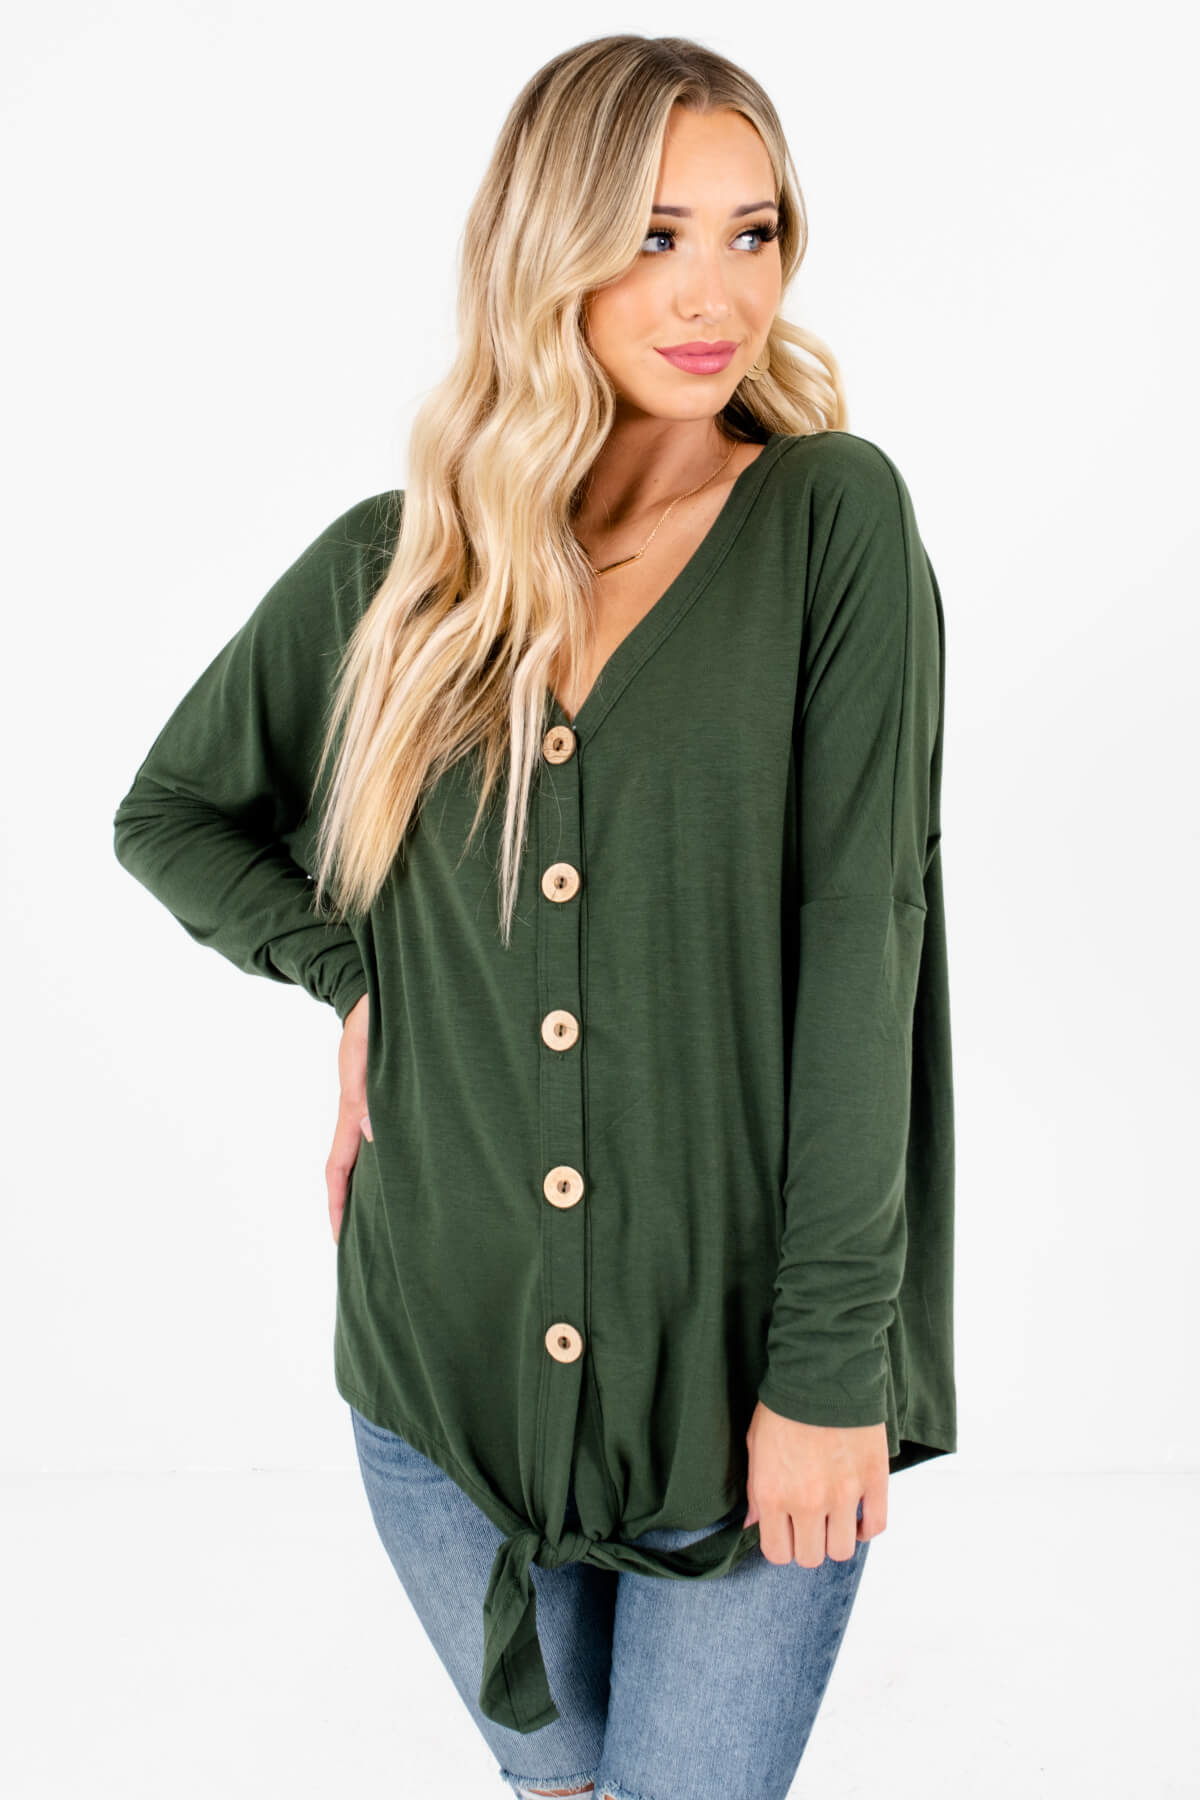 Women's Olive Green Long Sleeve Style Boutique Tops